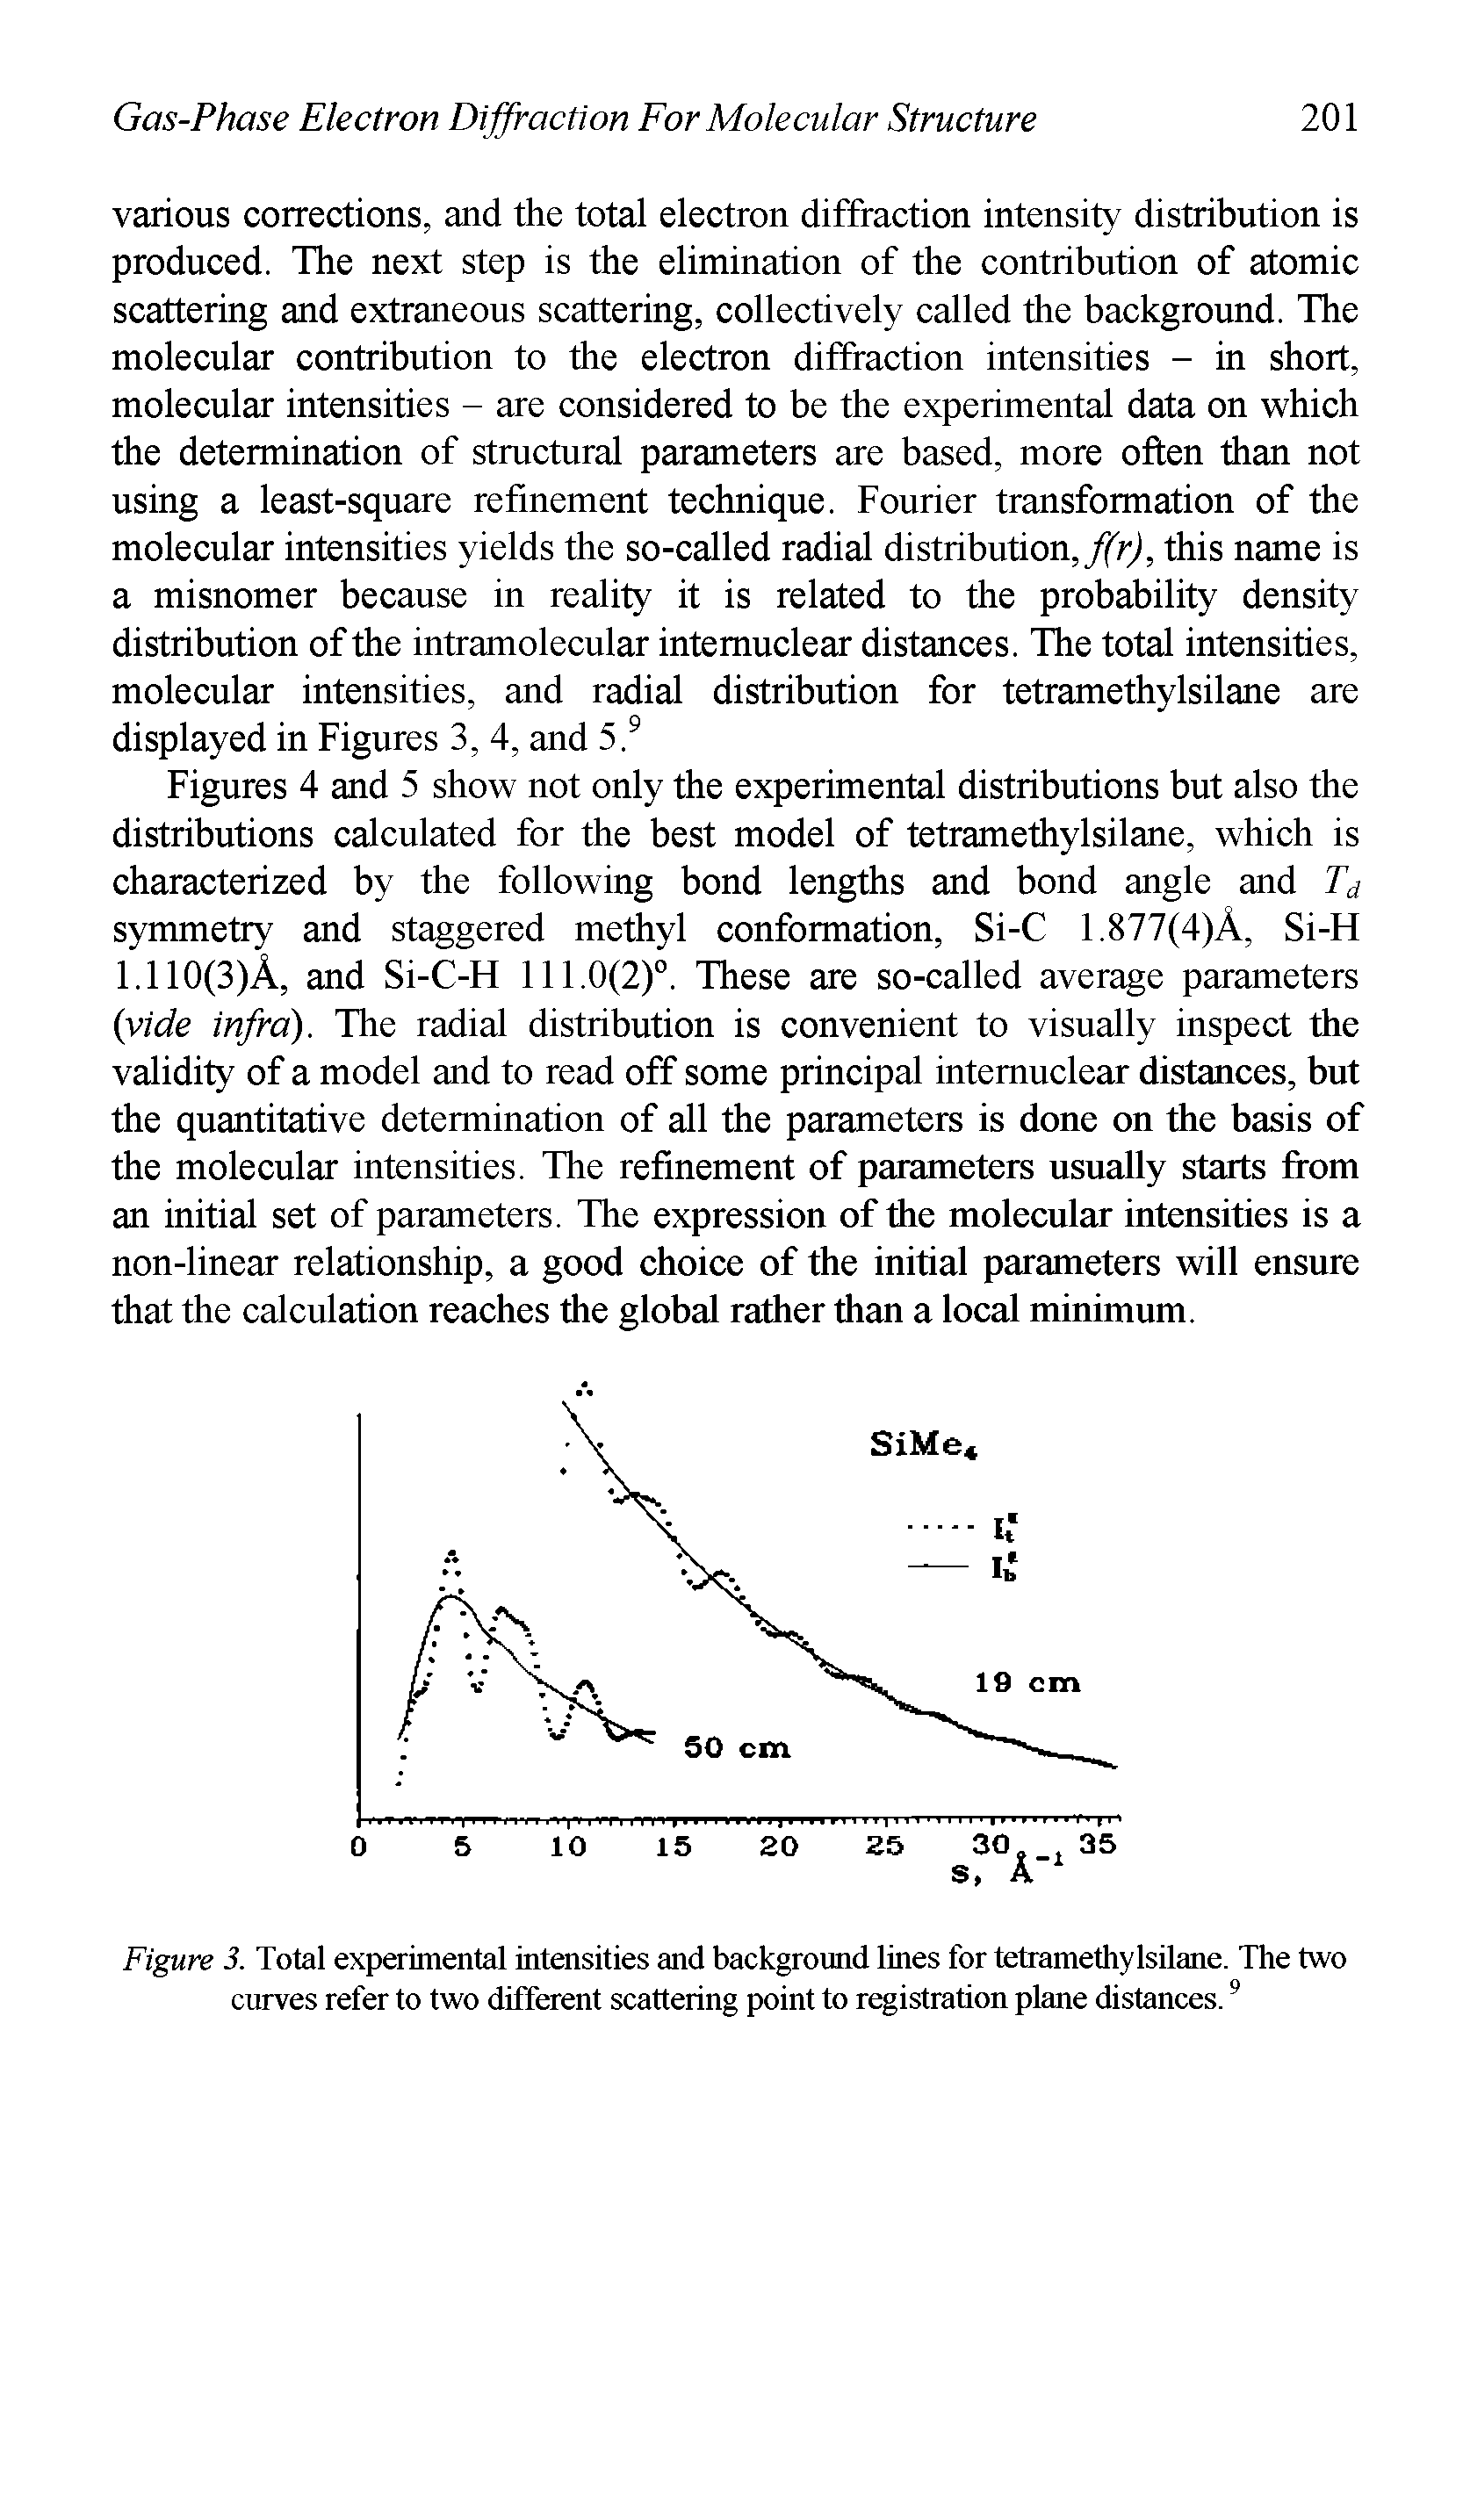 Figures 4 and 5 show not only the experimental distributions but also the distributions calculated for the best model of tetramethylsilane, which is characterized by the following bond lengths and bond angle and Td symmetry and staggered methyl conformation, Si-C 1.877(4)A, Si-H 1.110(3)A, and Si-C-H 111.0(2)°. These are so-called average parameters lyide infra). The radial distribution is convenient to visually inspect the validity of a model and to read off some principal intemuclear distances, but the quantitative determination of all the parameters is done on the basis of the molecular intensities. The refinement of parameters usually starts from an initial set of parameters. The expression of the molecular intensities is a non-linear relationship, a good choice of the initial parameters will ensure that the calculation reaches the global rather than a local minimum.